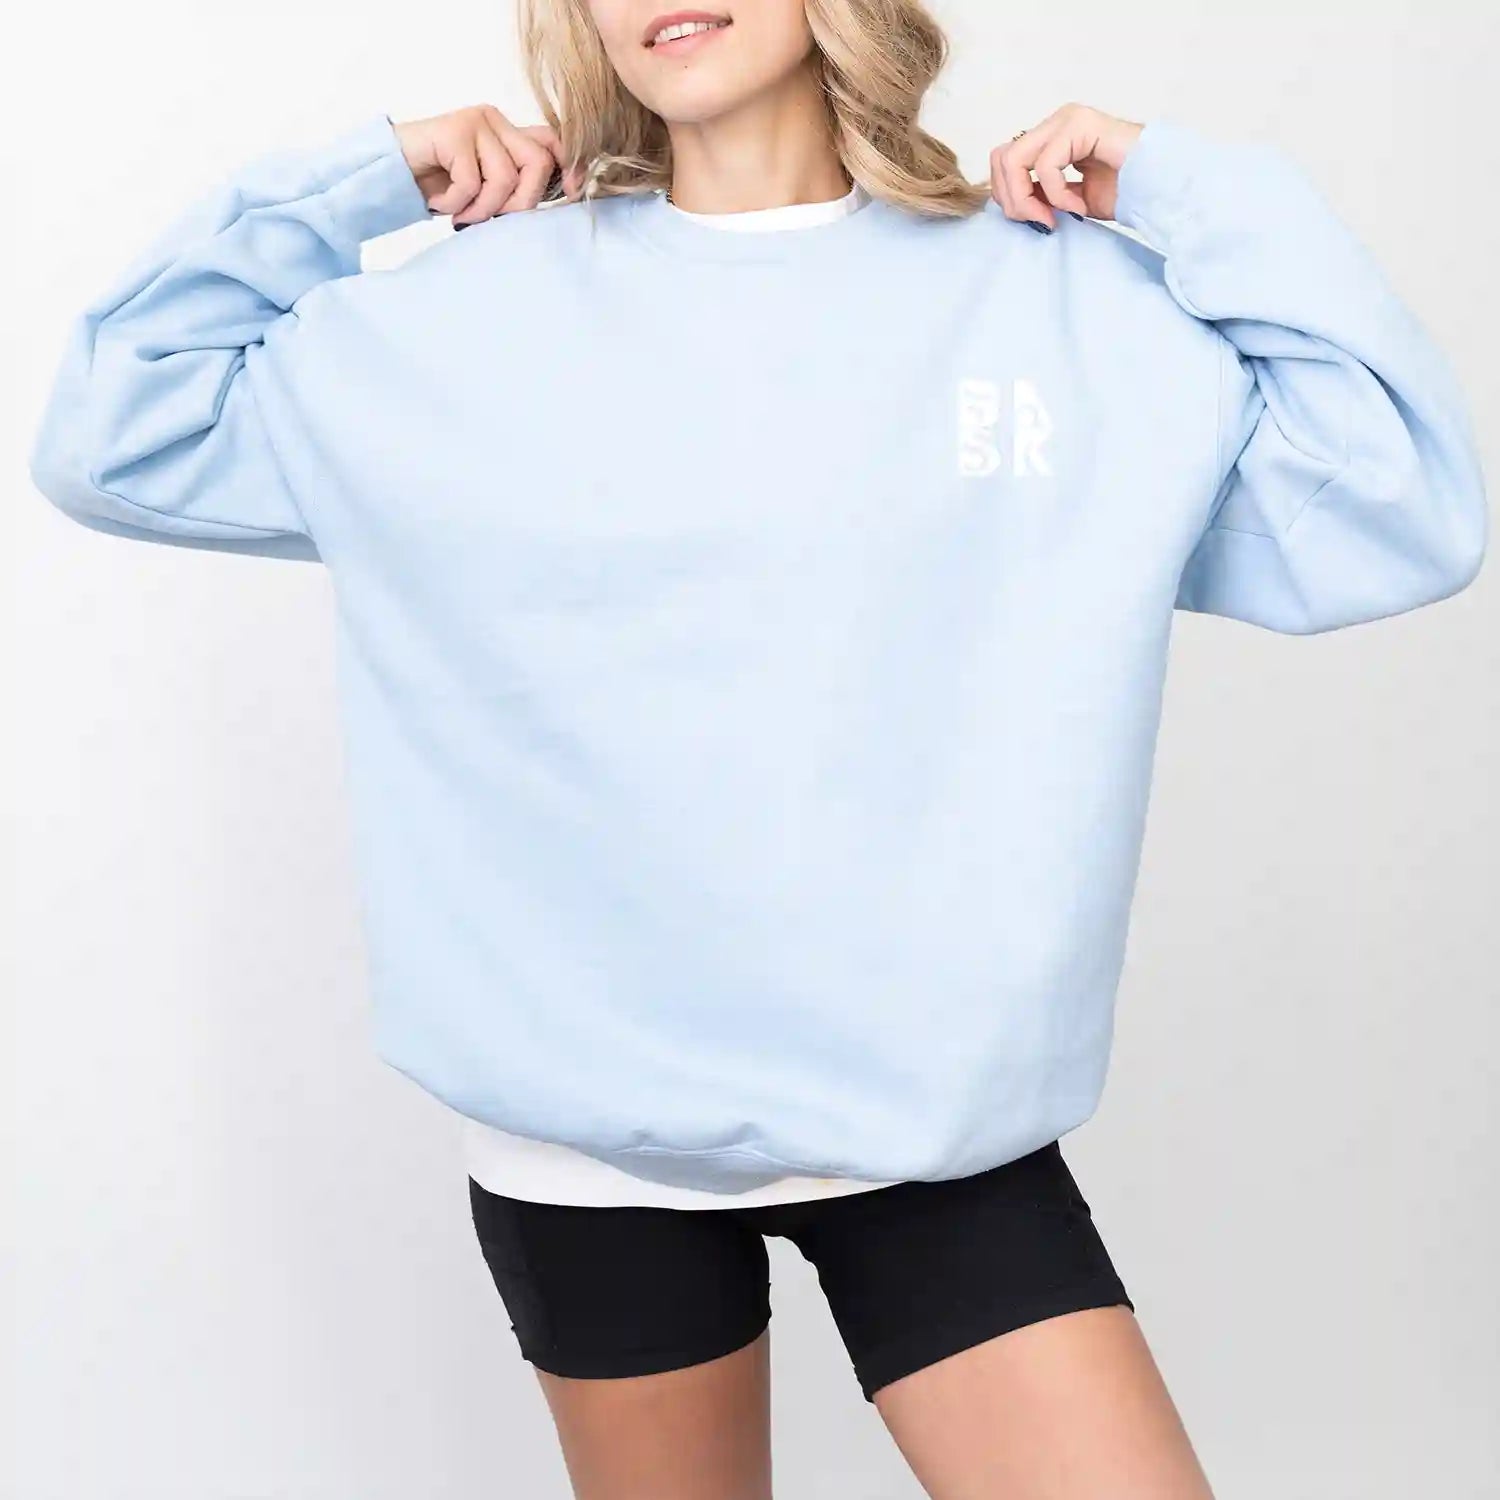 A woman wearing a light blue Water Walking Faith Sweatshirt and Be Still and Know clothing.